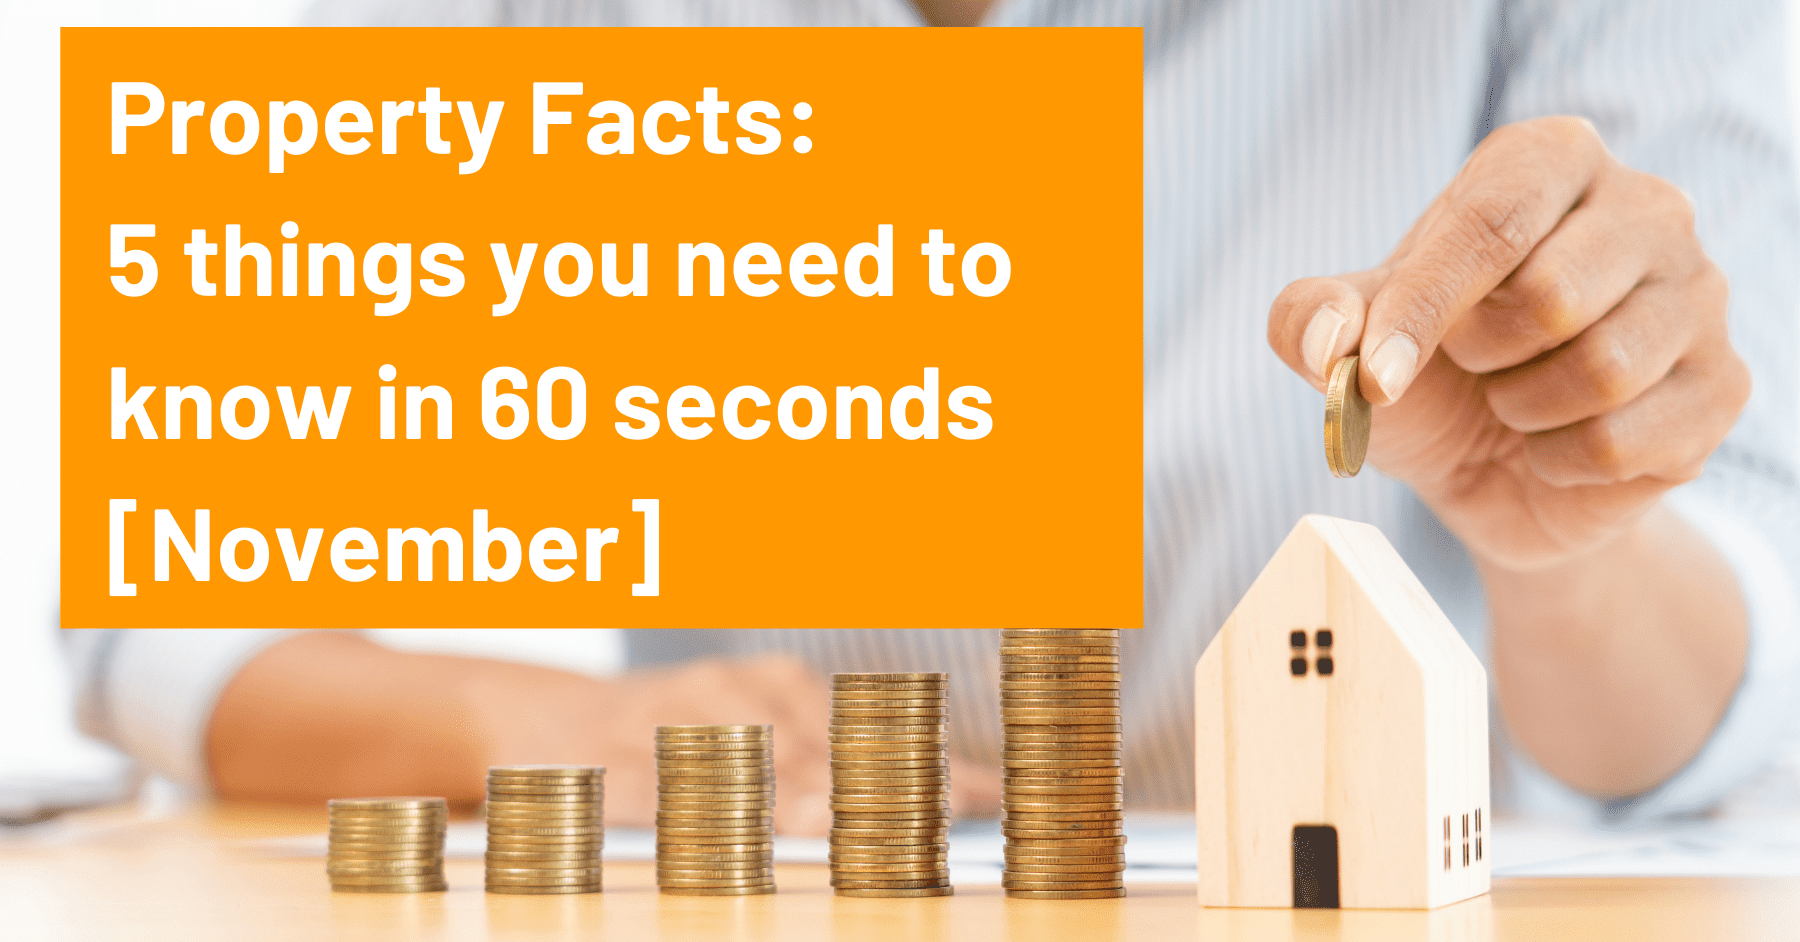 Investment property facts for November